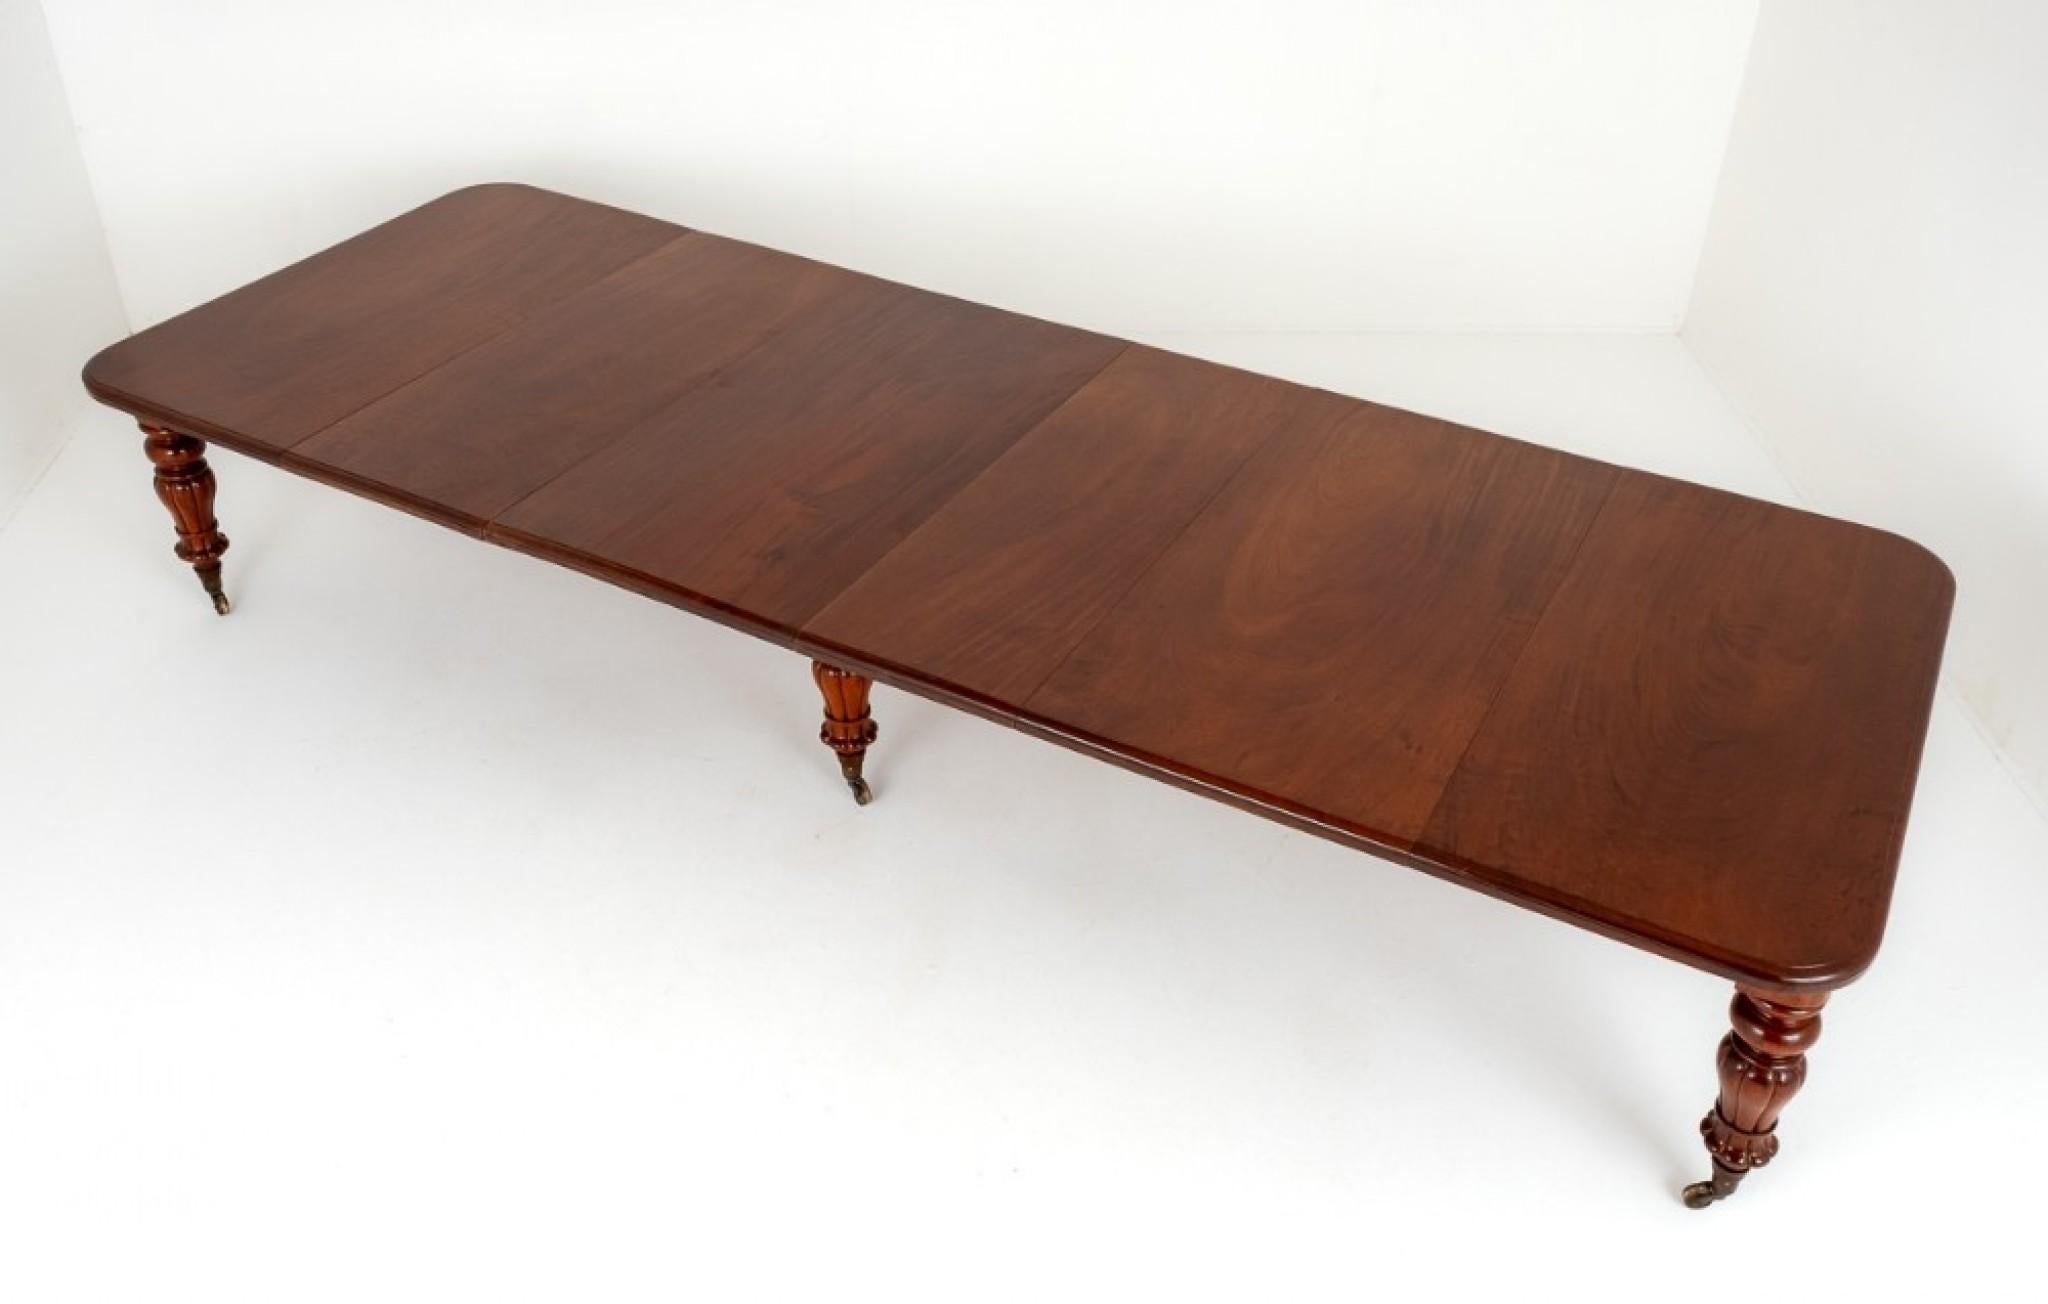 Superb William IV Mahogany Extending Dining Table.
19th Century
This Impressive Table Stands Upon Typical Impressive William IV Legs with Original Castors.
The Table Extends by way of a Pullout Telescopic Mechanism to accept up to 4 Extra